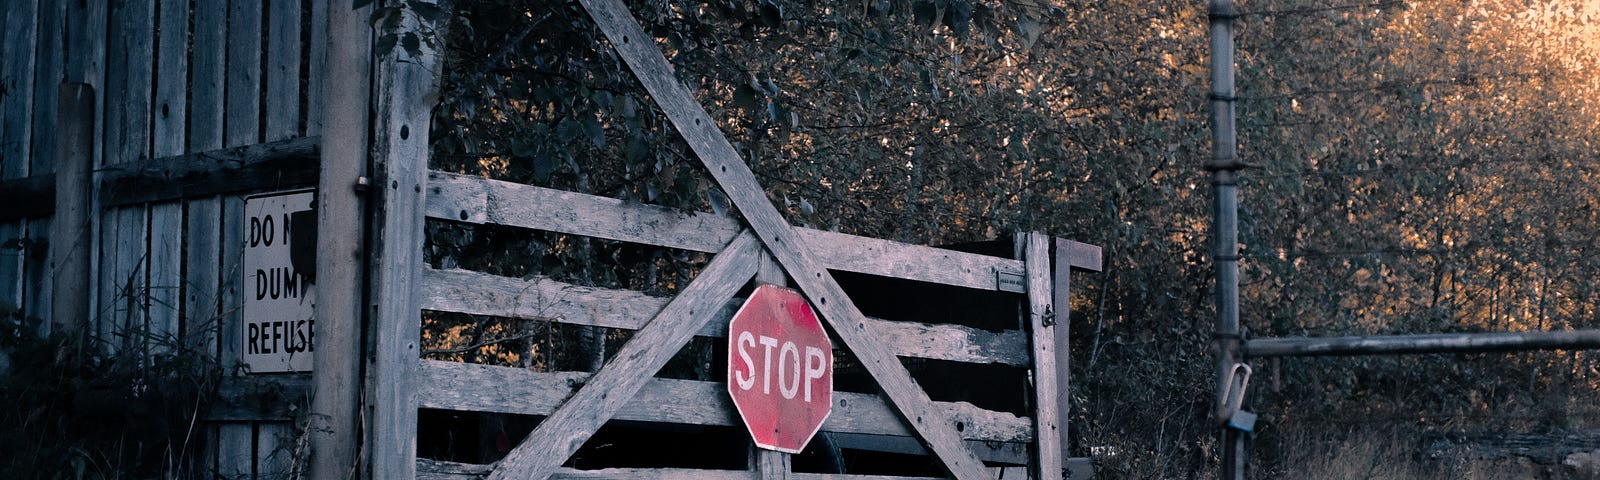 Photo of stop sign on fence in rural town